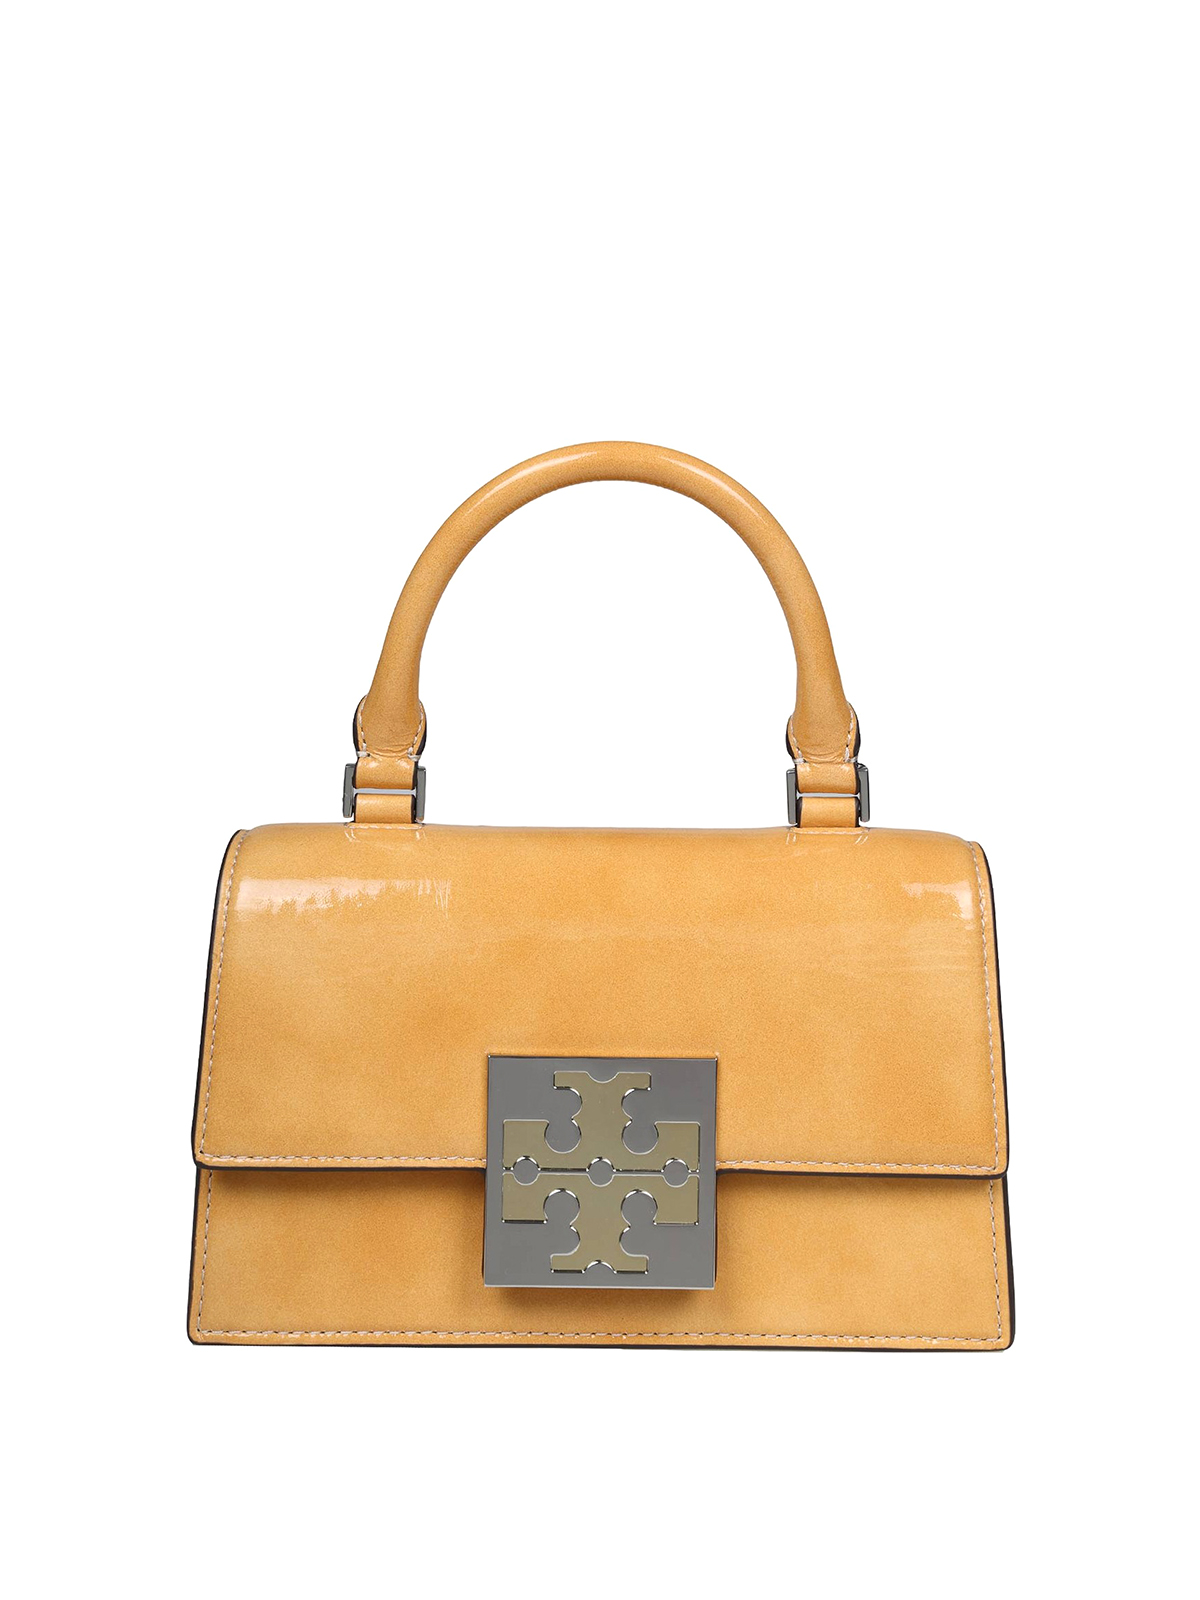 Tops & Tank tops Tory Burch - mini top handle bag in shiny leather